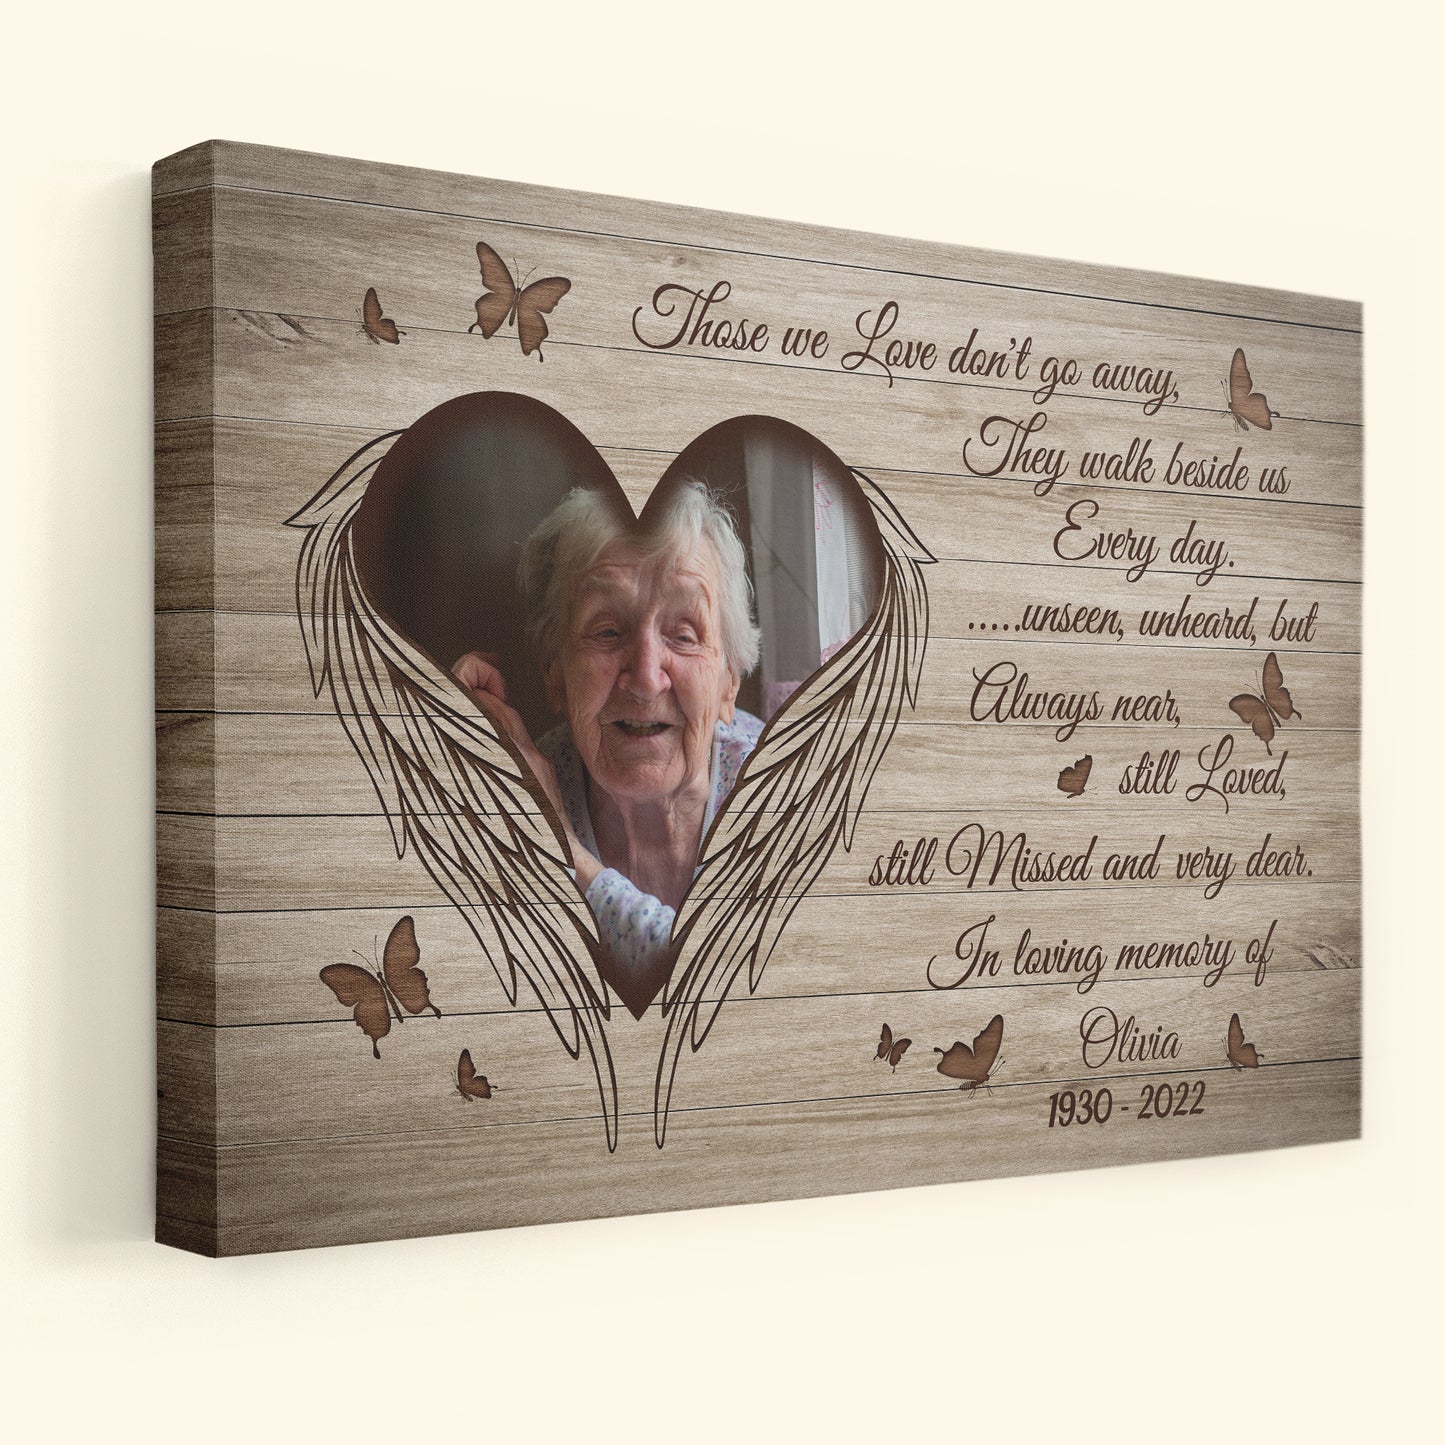 Those We Love Don't Go Away - Personalized Photo Poster/Wrapped Canvas - Loving, Memorial Gift For Family Members With Lost One